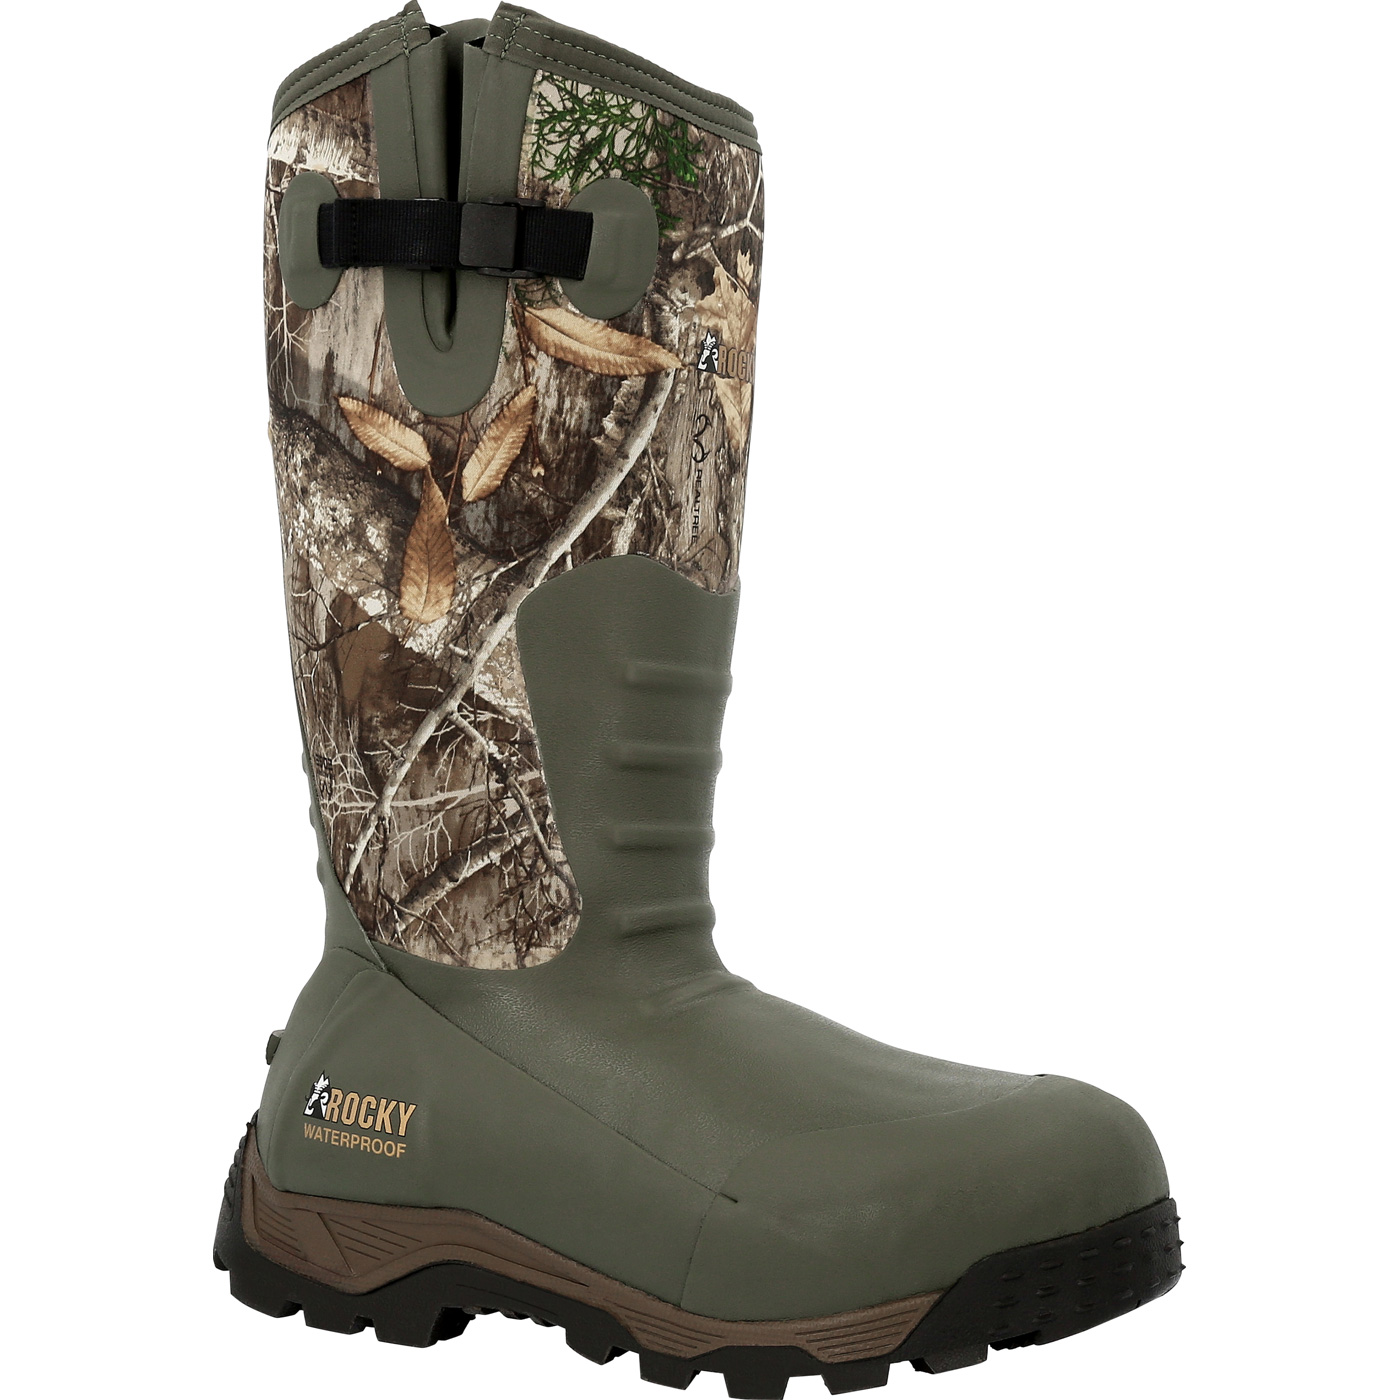 Rocky Sport Pro 1200 Gram Boots  Buy Rocky Rubber Boots & Insulated  Waterproof Boots at Rocky Boots